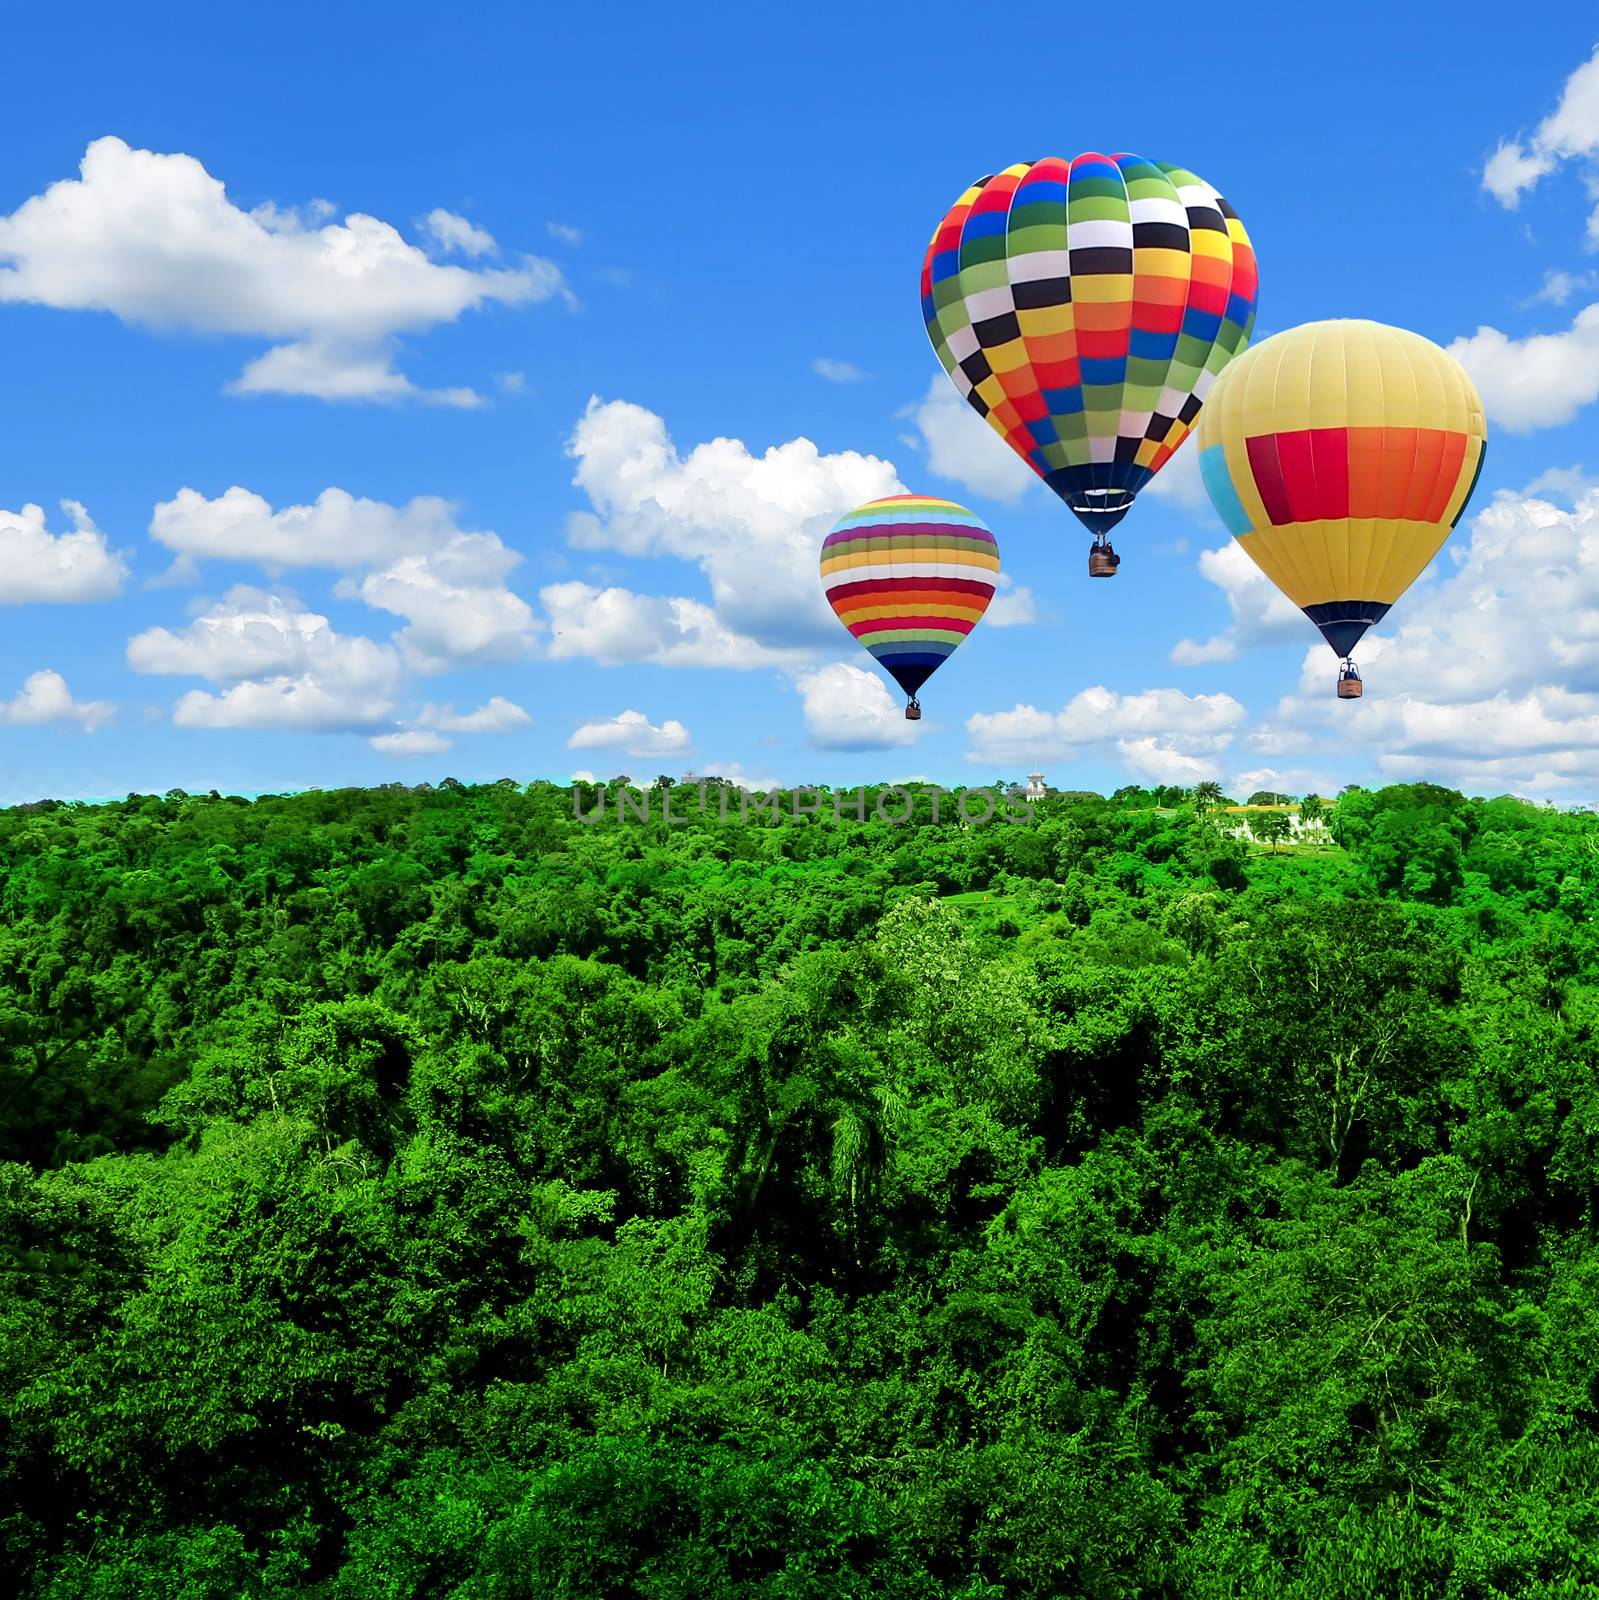 Hot air balloons over the forest with blue sky